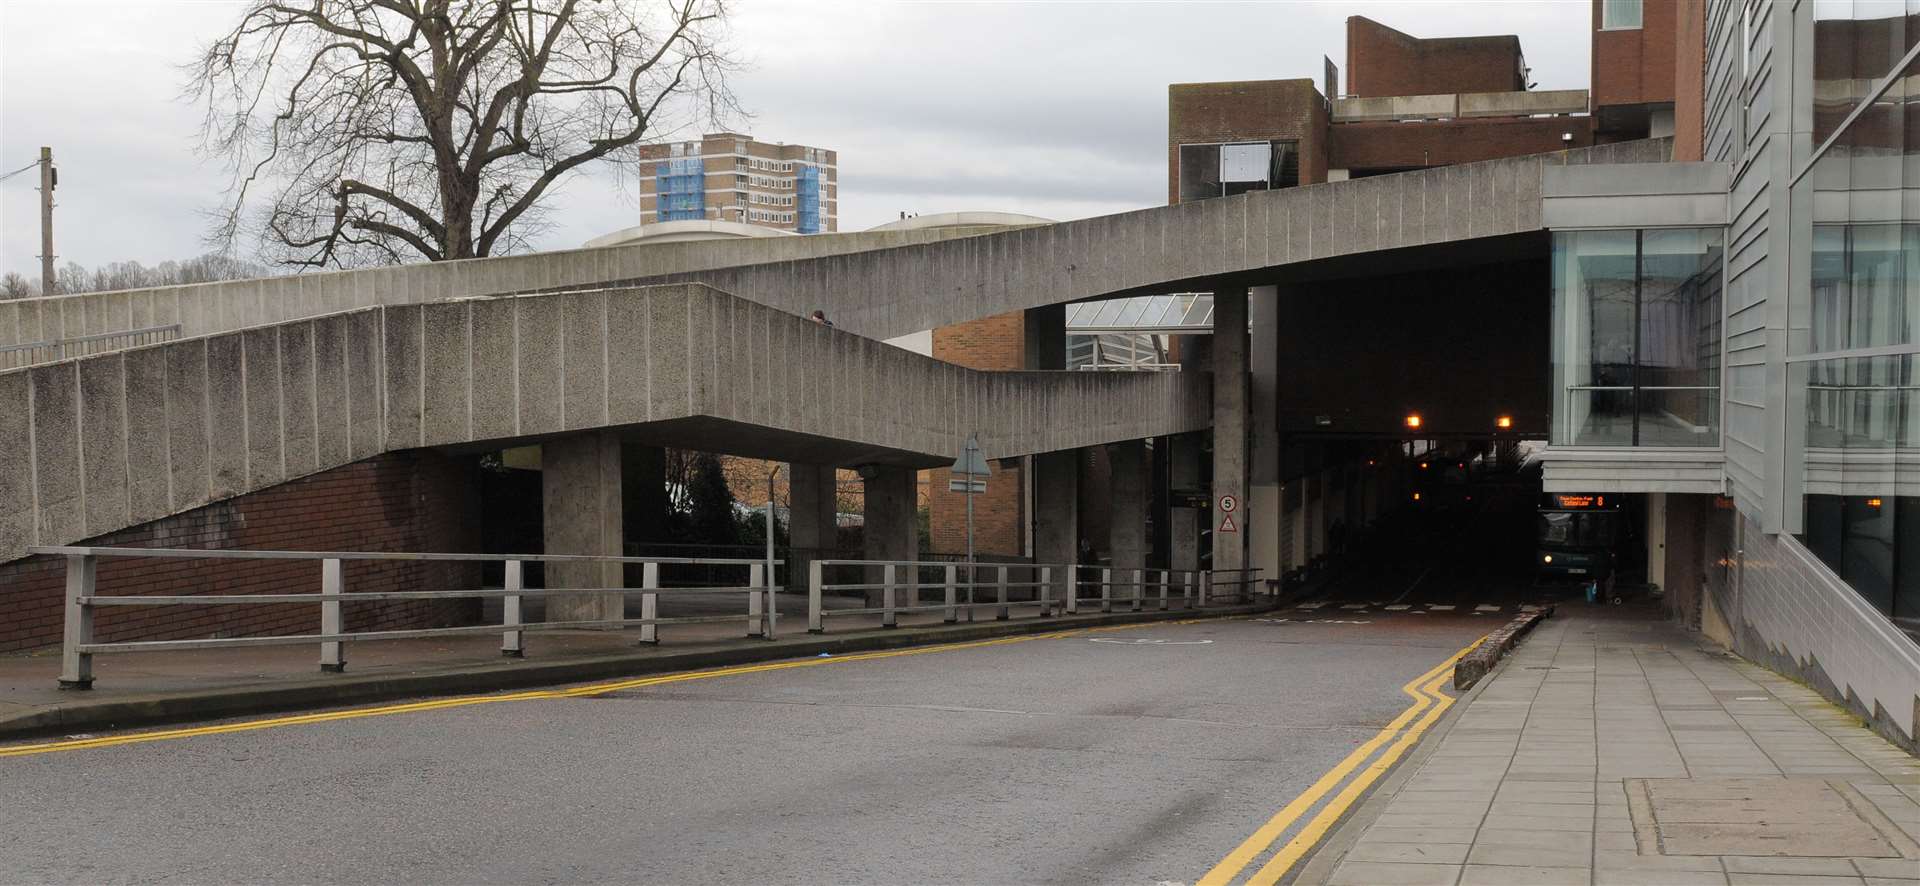 Maidstone bus station as it currently stands. Picture: Steve Crispe